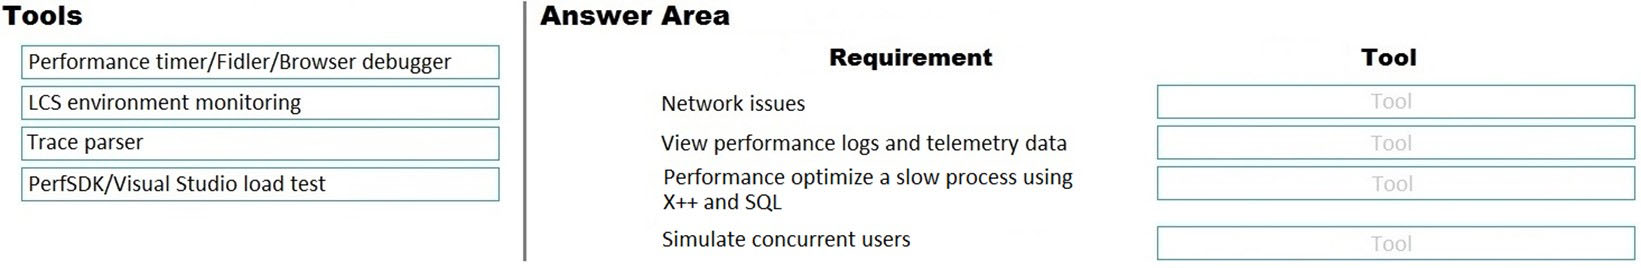 Tools Answer Area

Performance timer/Fidler/Browser debugger Requirement Tool
LCS environment monitoring Network issues
Trace parser View performance logs and telemetry data
PerfSDK/Visual Studio load test Performance optimize a slow process using
X++ and SQL
Simulate concurrent users